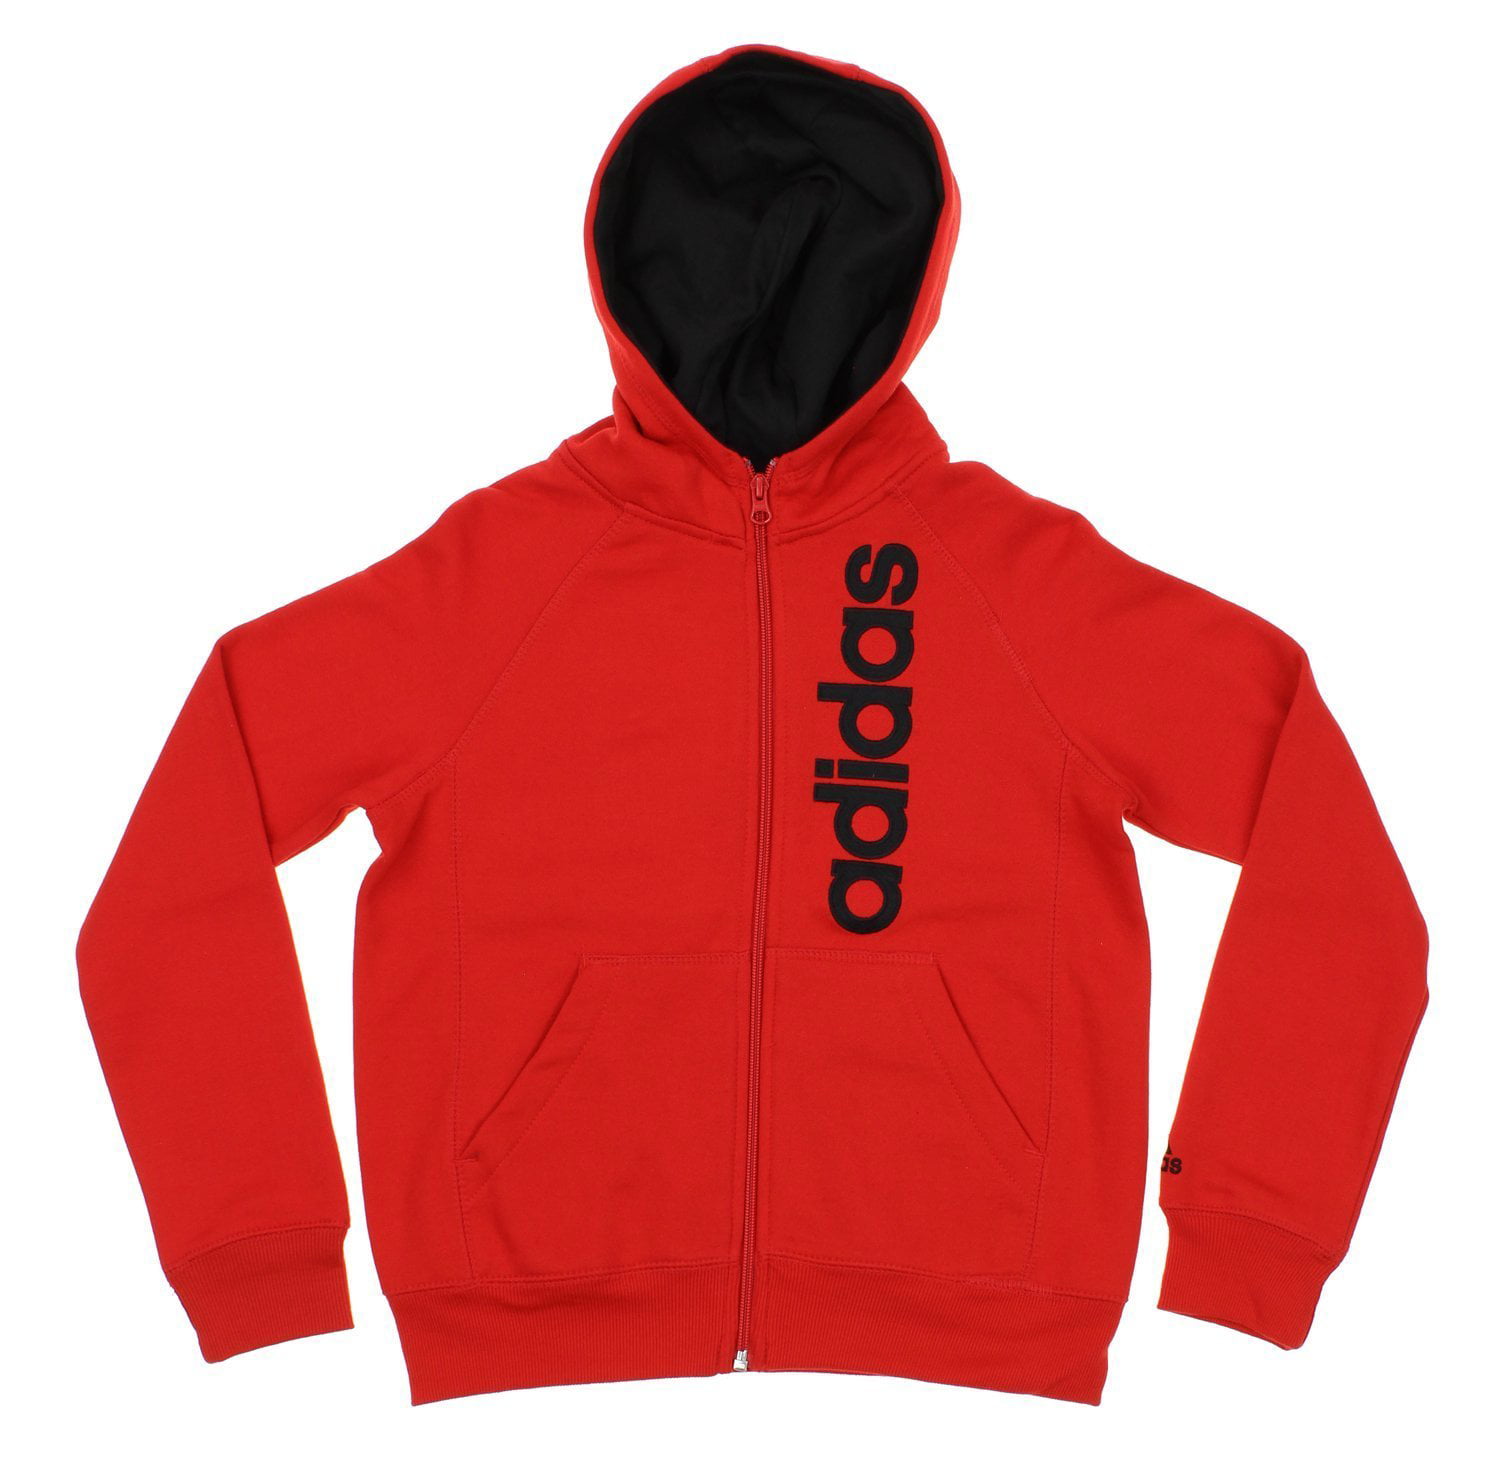 Adidas Youth Full Embroidered Hoodie, Color Options - Walmart.com